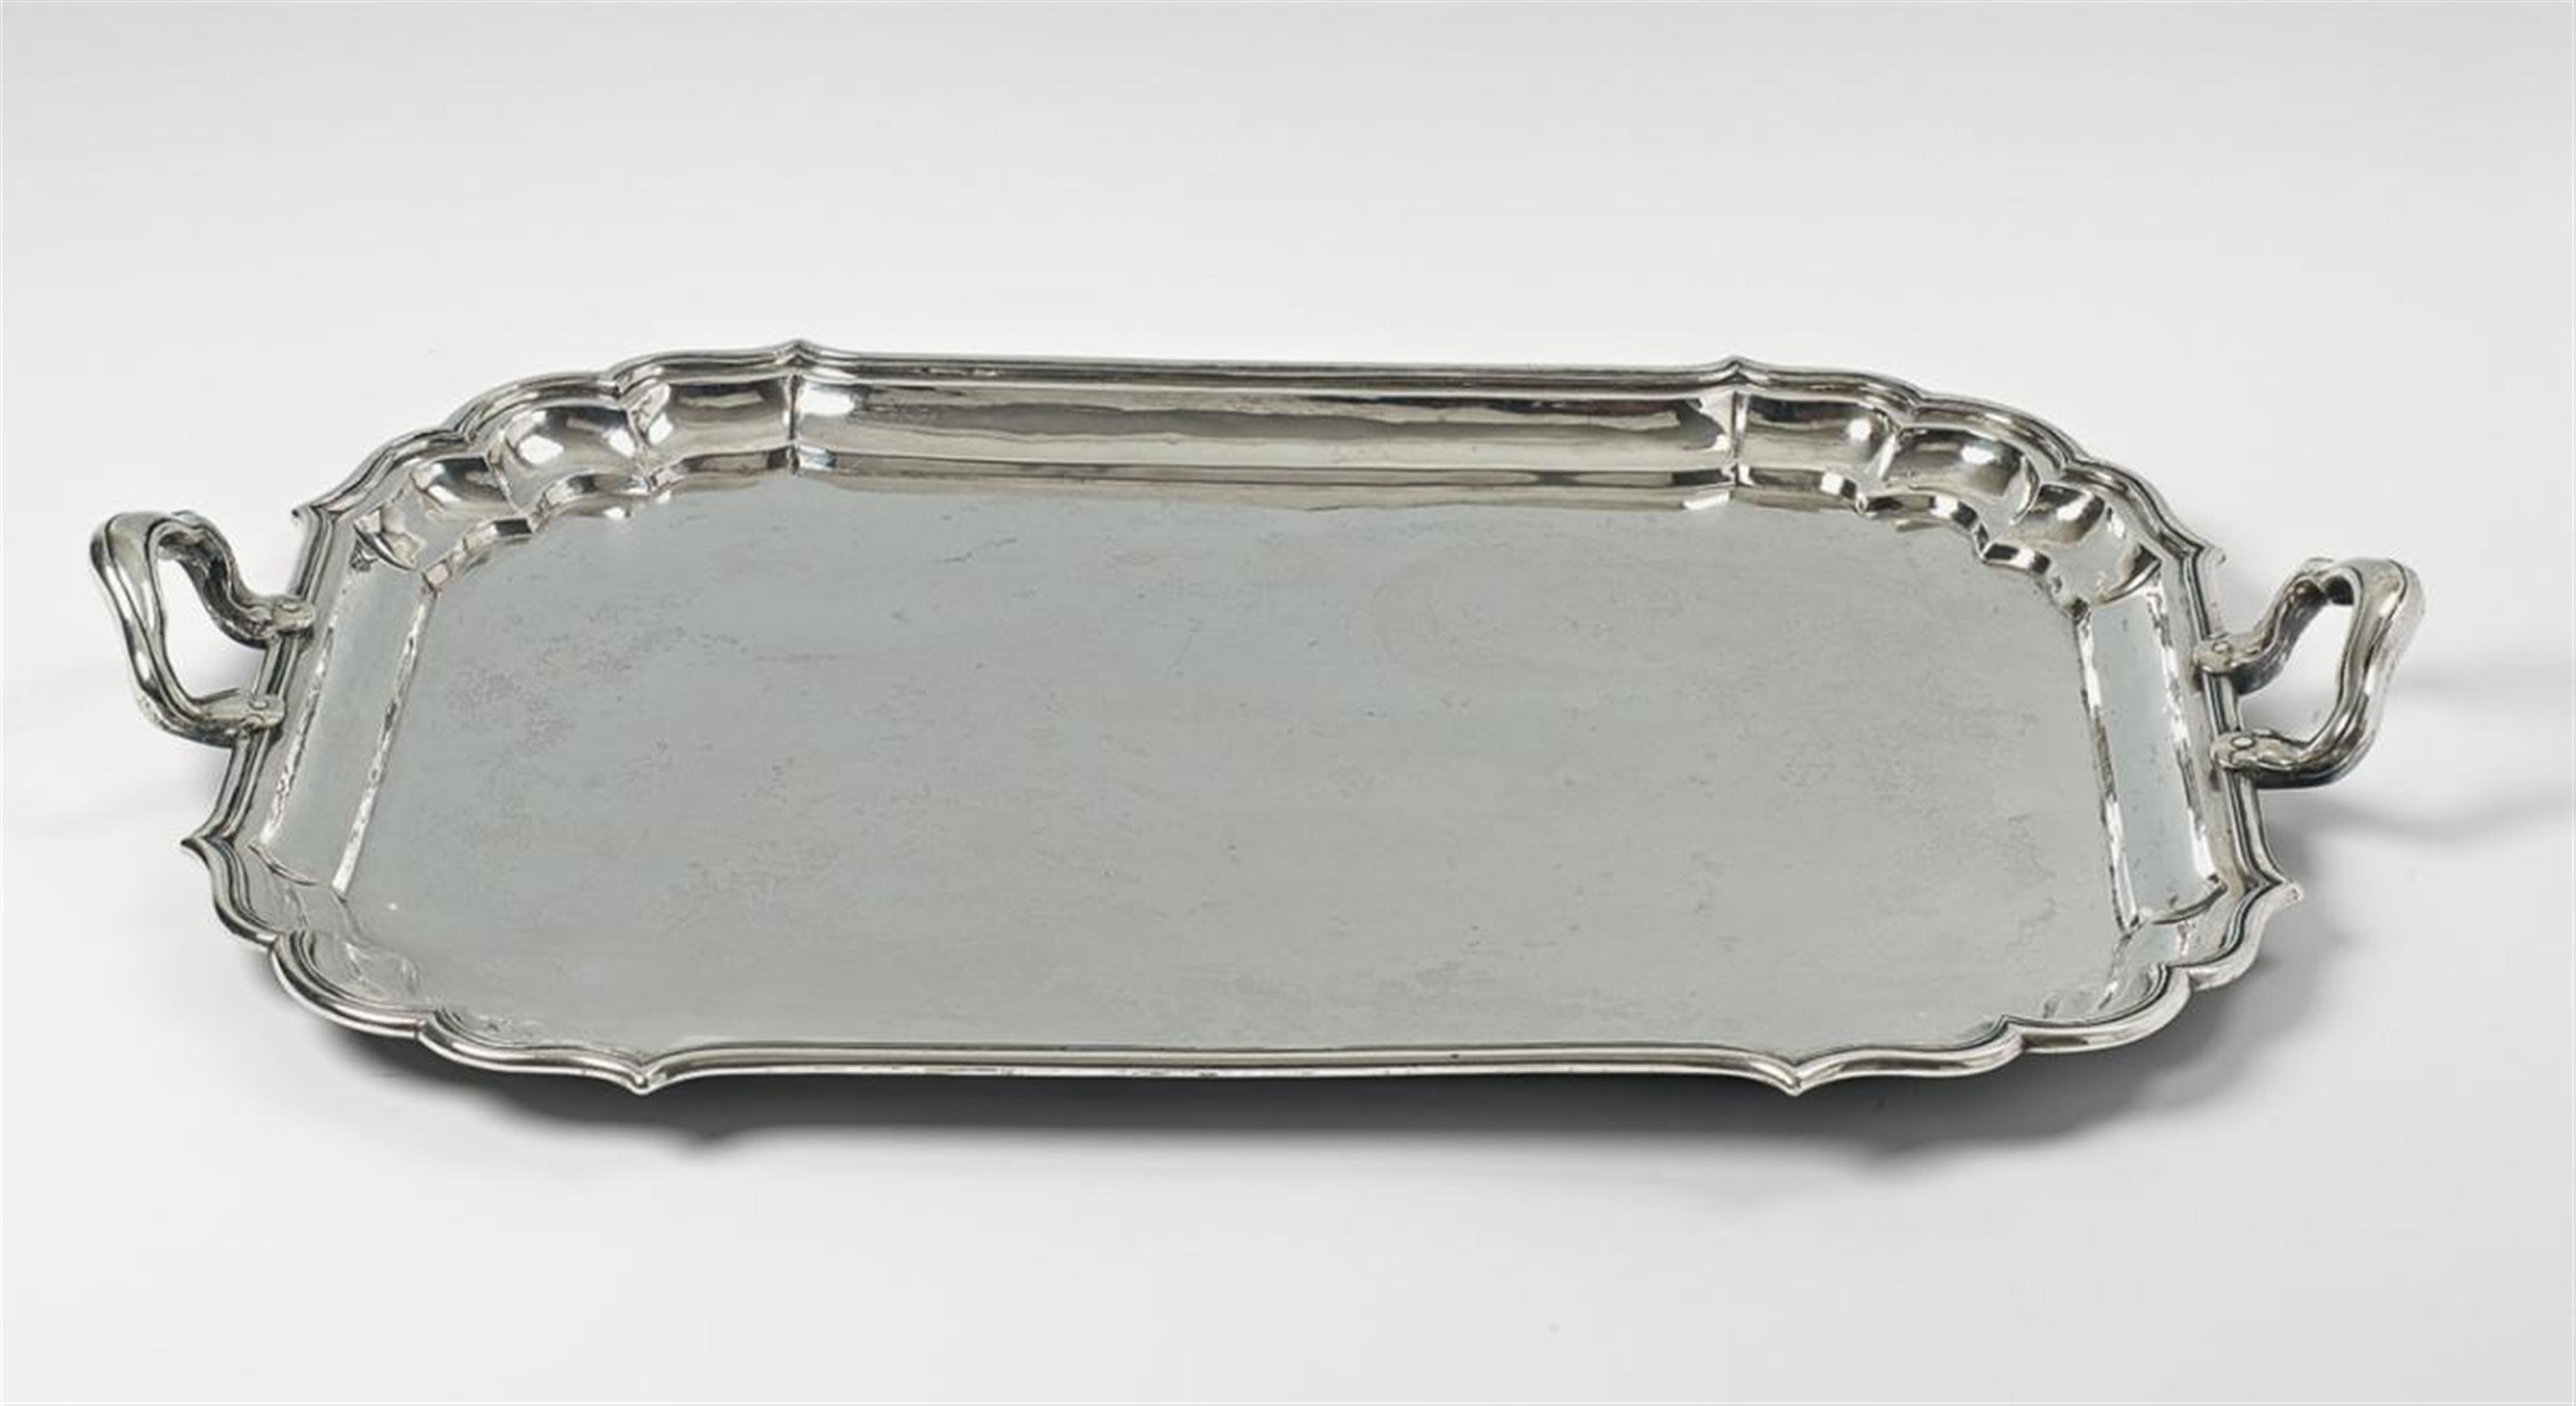 A large Roman silver tray. Unidentified maker's mark "P", probably 19th C. - image-1